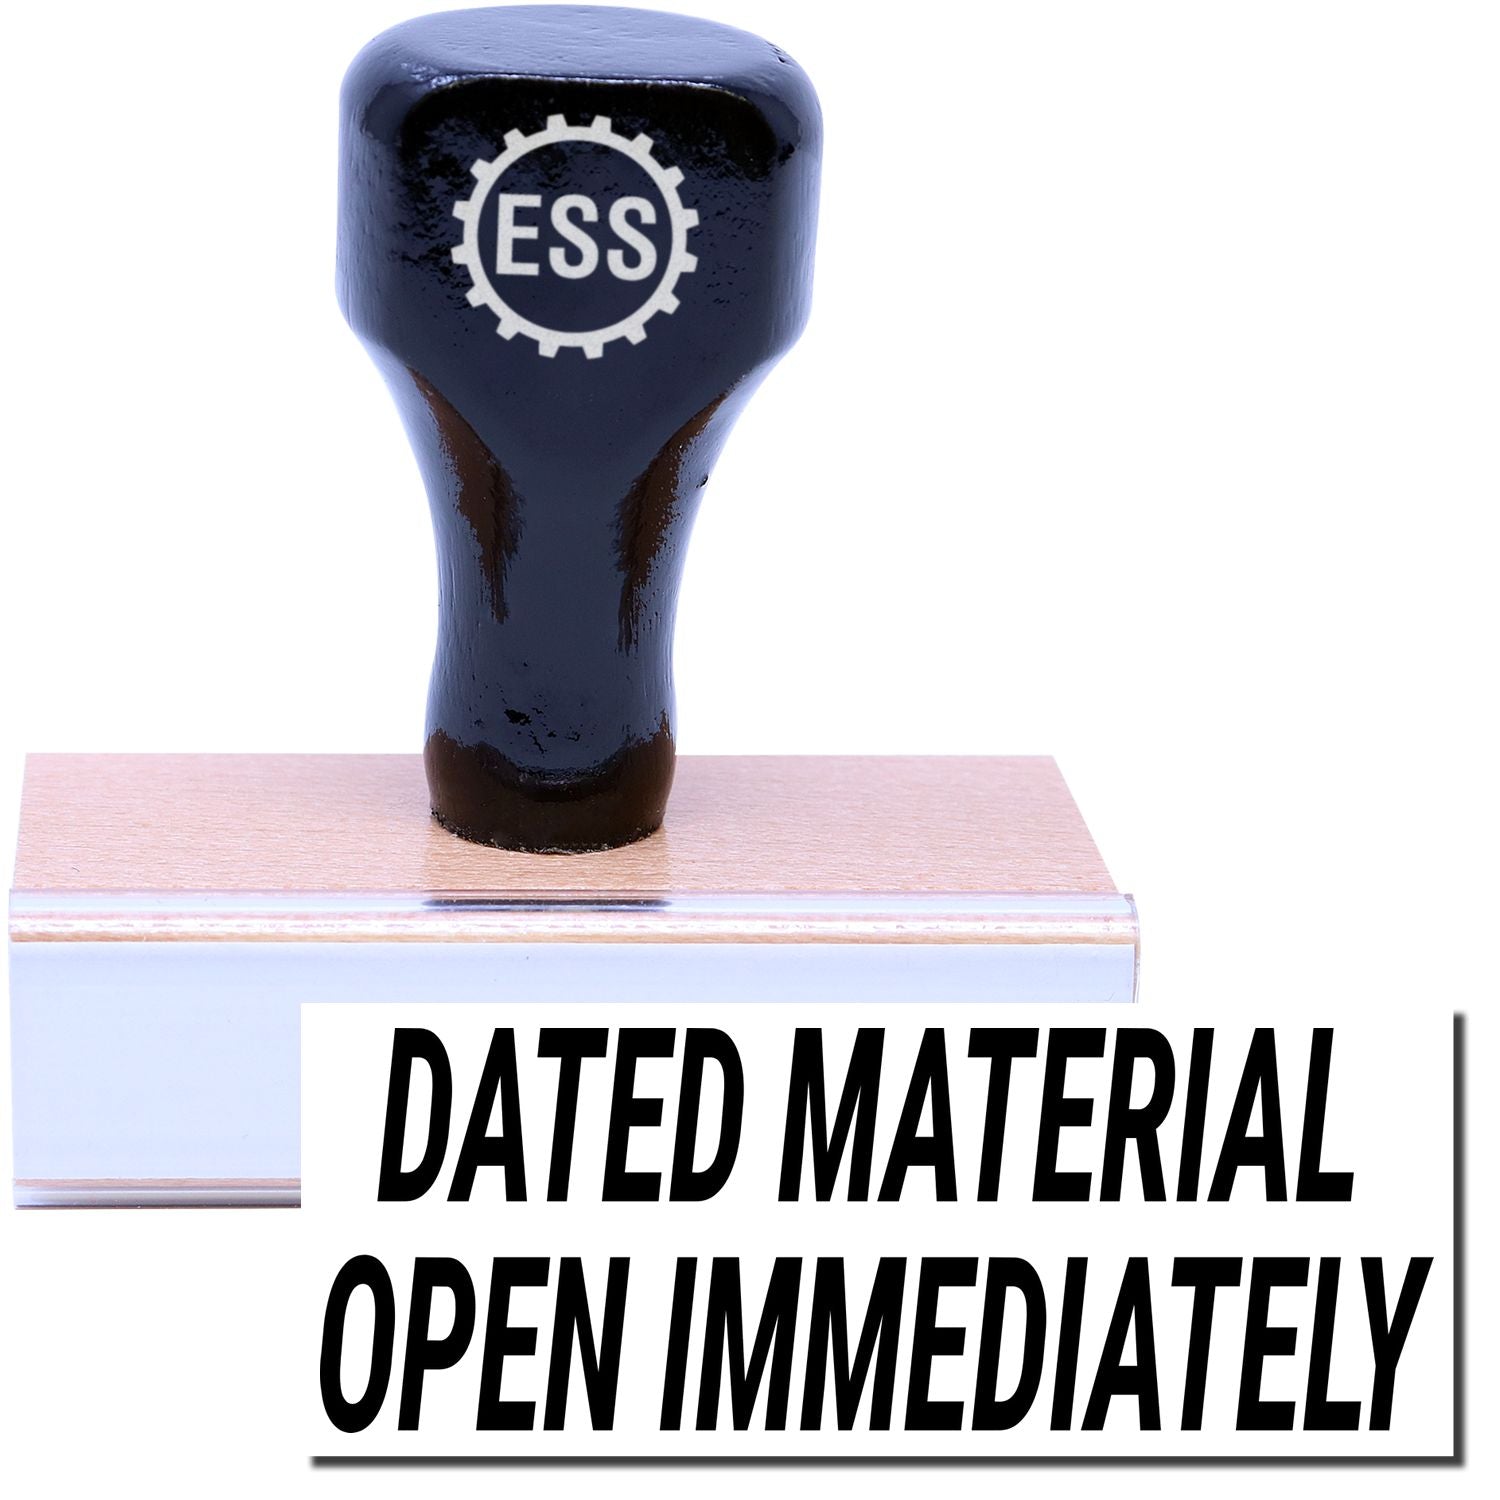 A stock office rubber stamp with a stamped image showing how the text "DATED MATERIAL OPEN IMMEDIATELY" is displayed after stamping.